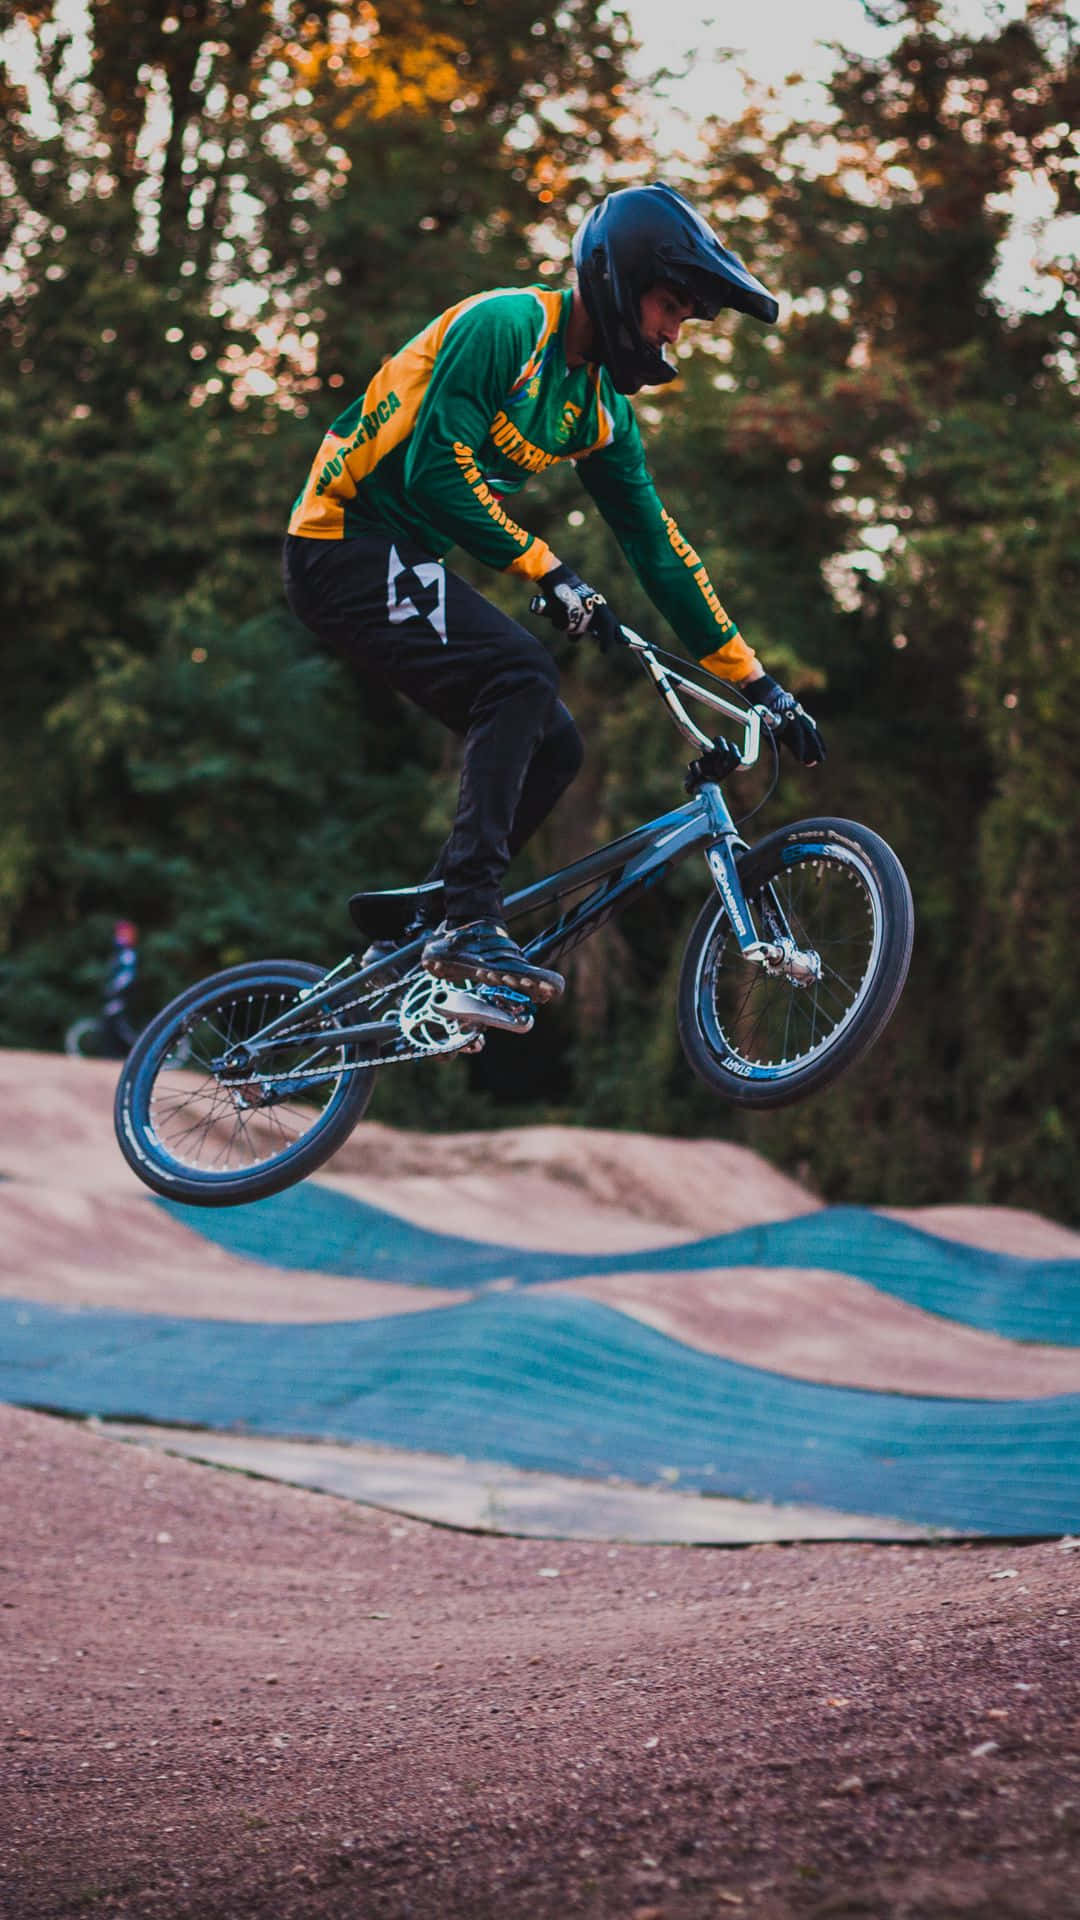 Doing a tailwhip on a bmx in the great outdoors Wallpaper